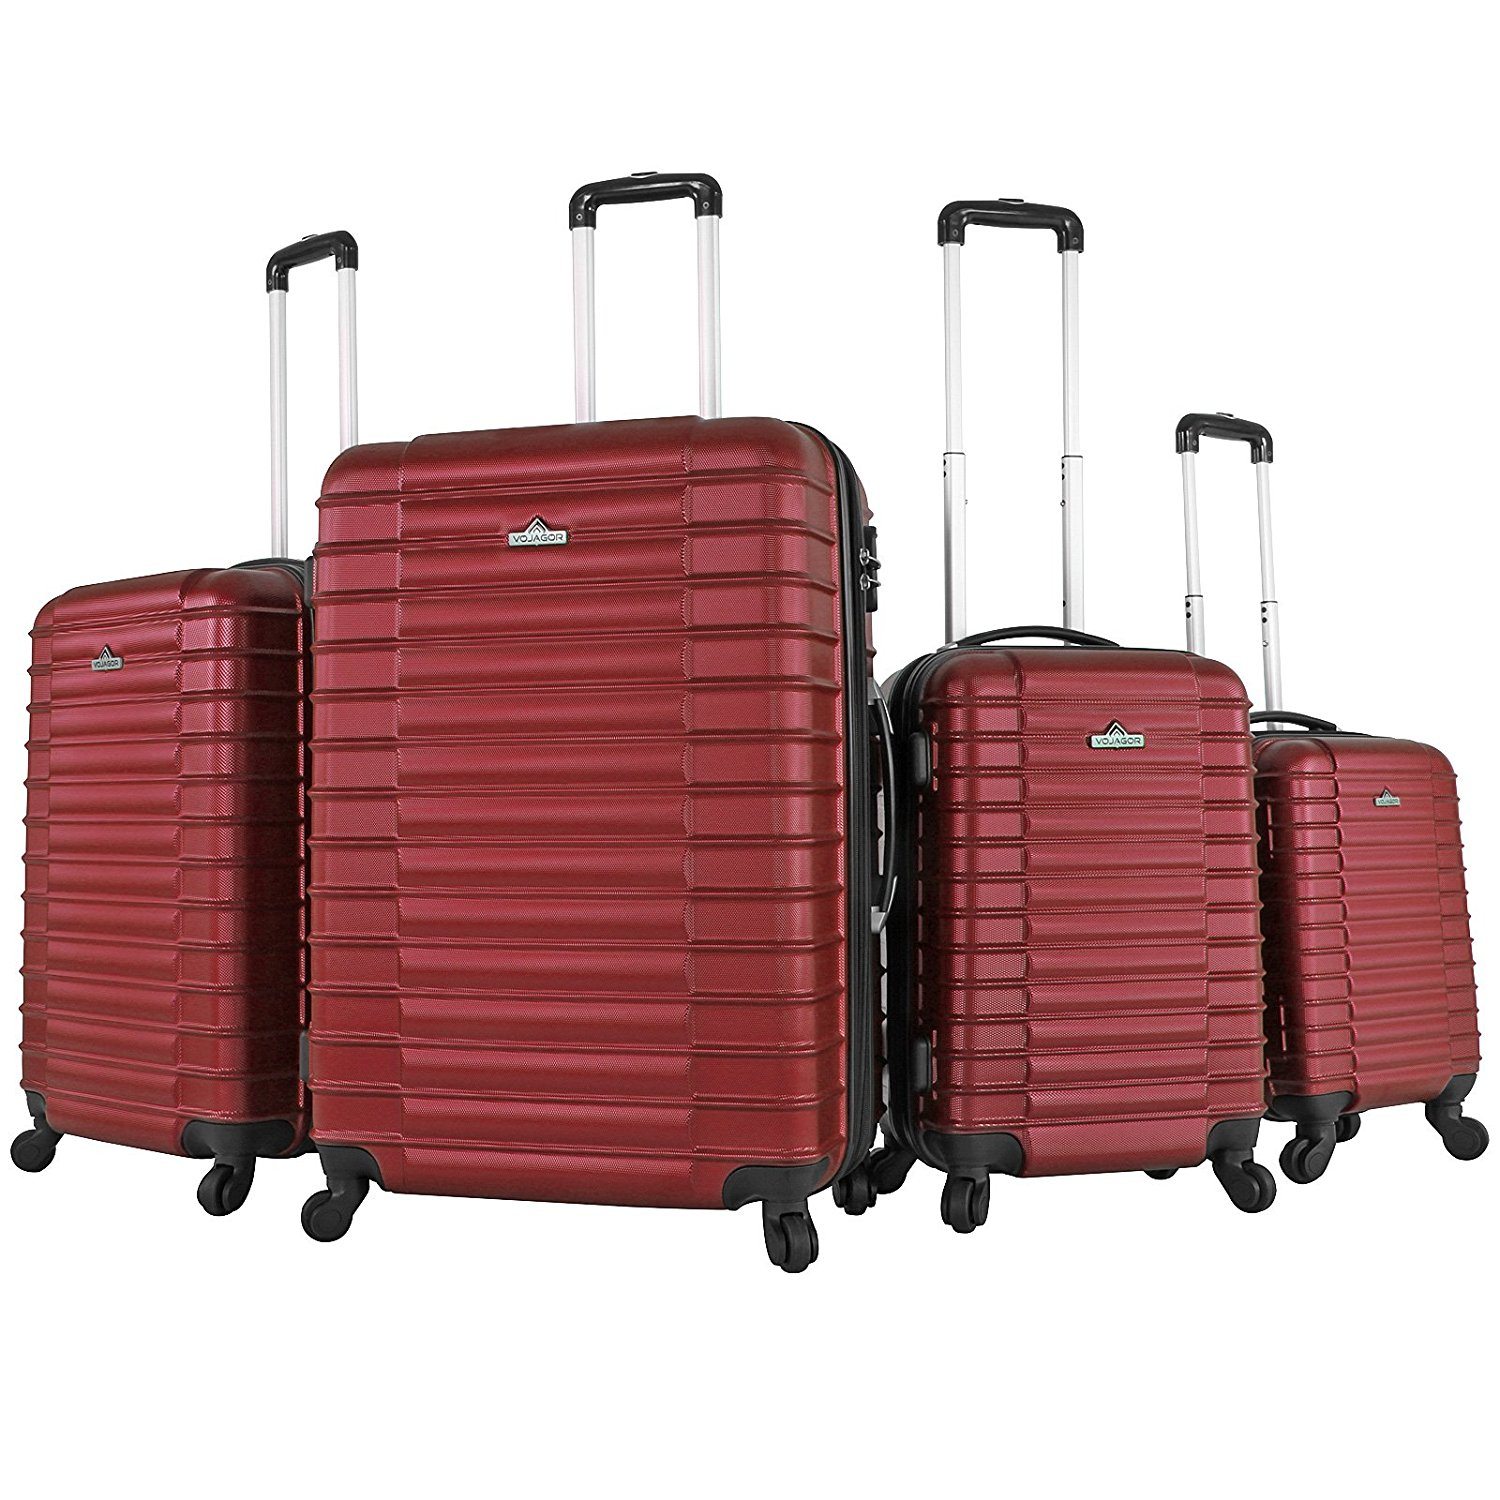 Vojagor Set of 4 Hard Shell Trolley Suitcases Reviewed